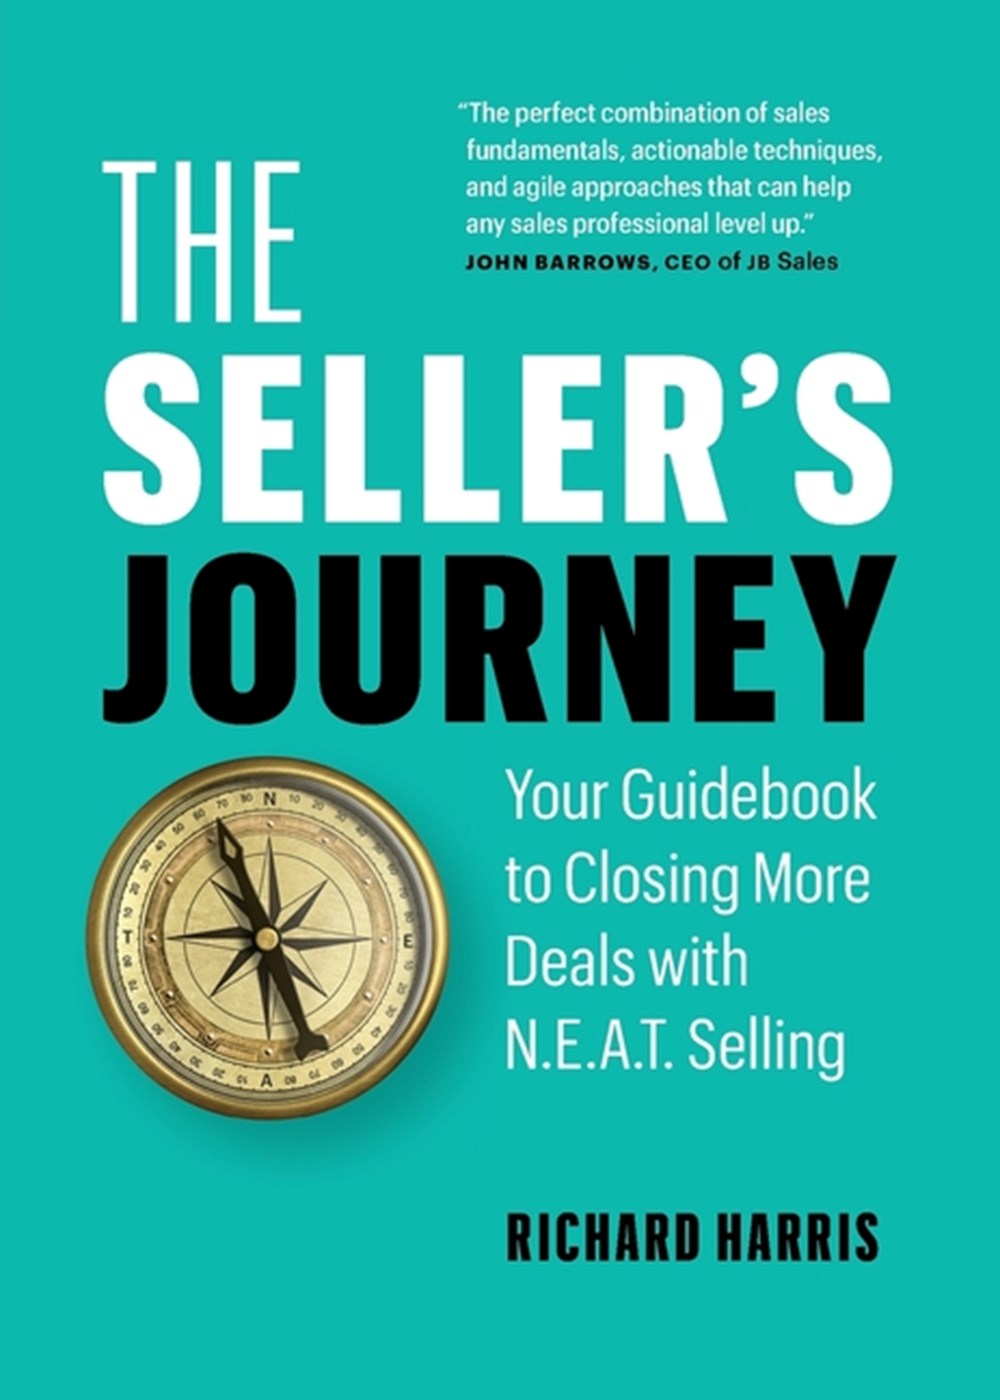 Seller's Journey: Your Guidebook to Closing More Deals with N.E.A.T. Selling